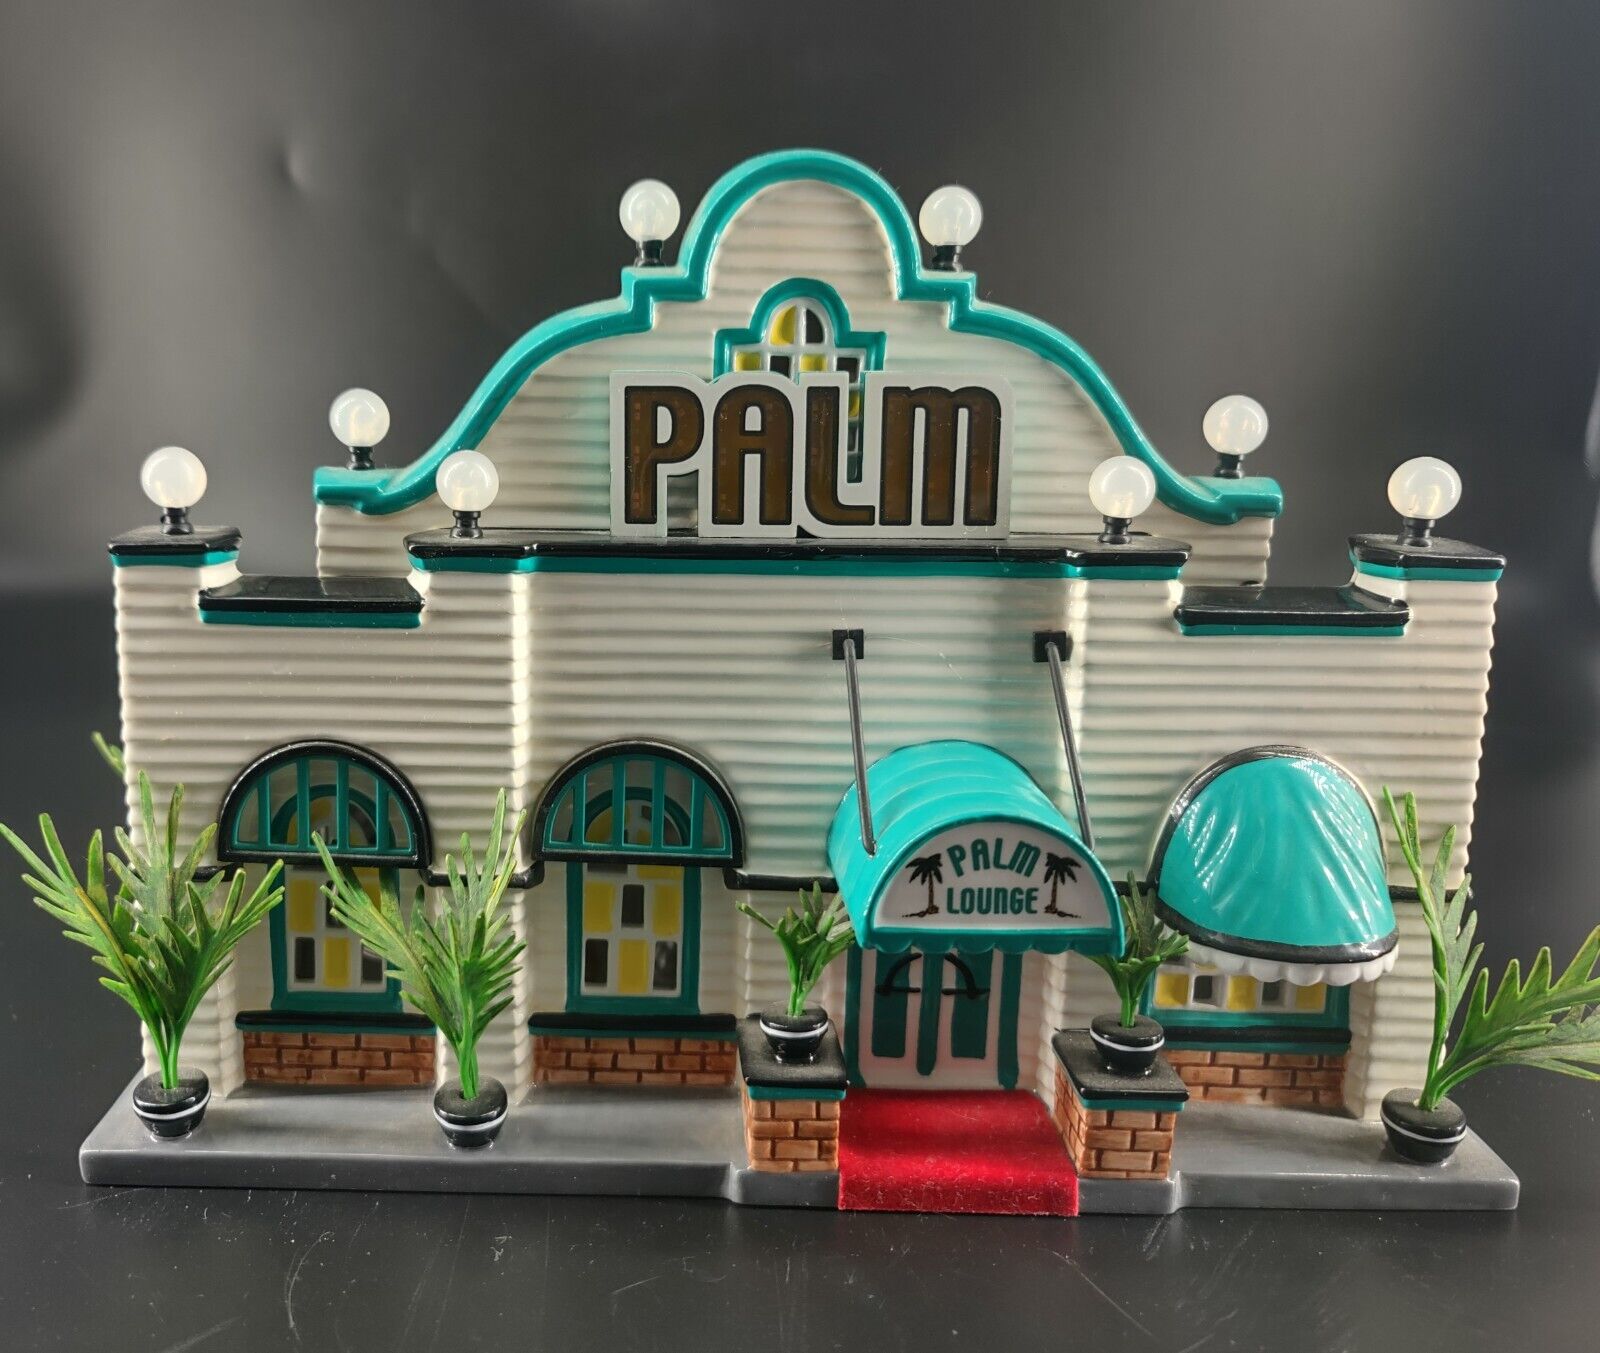 Department 56 Snow Villages Palm Lounge & Supper Club 2000 Retired